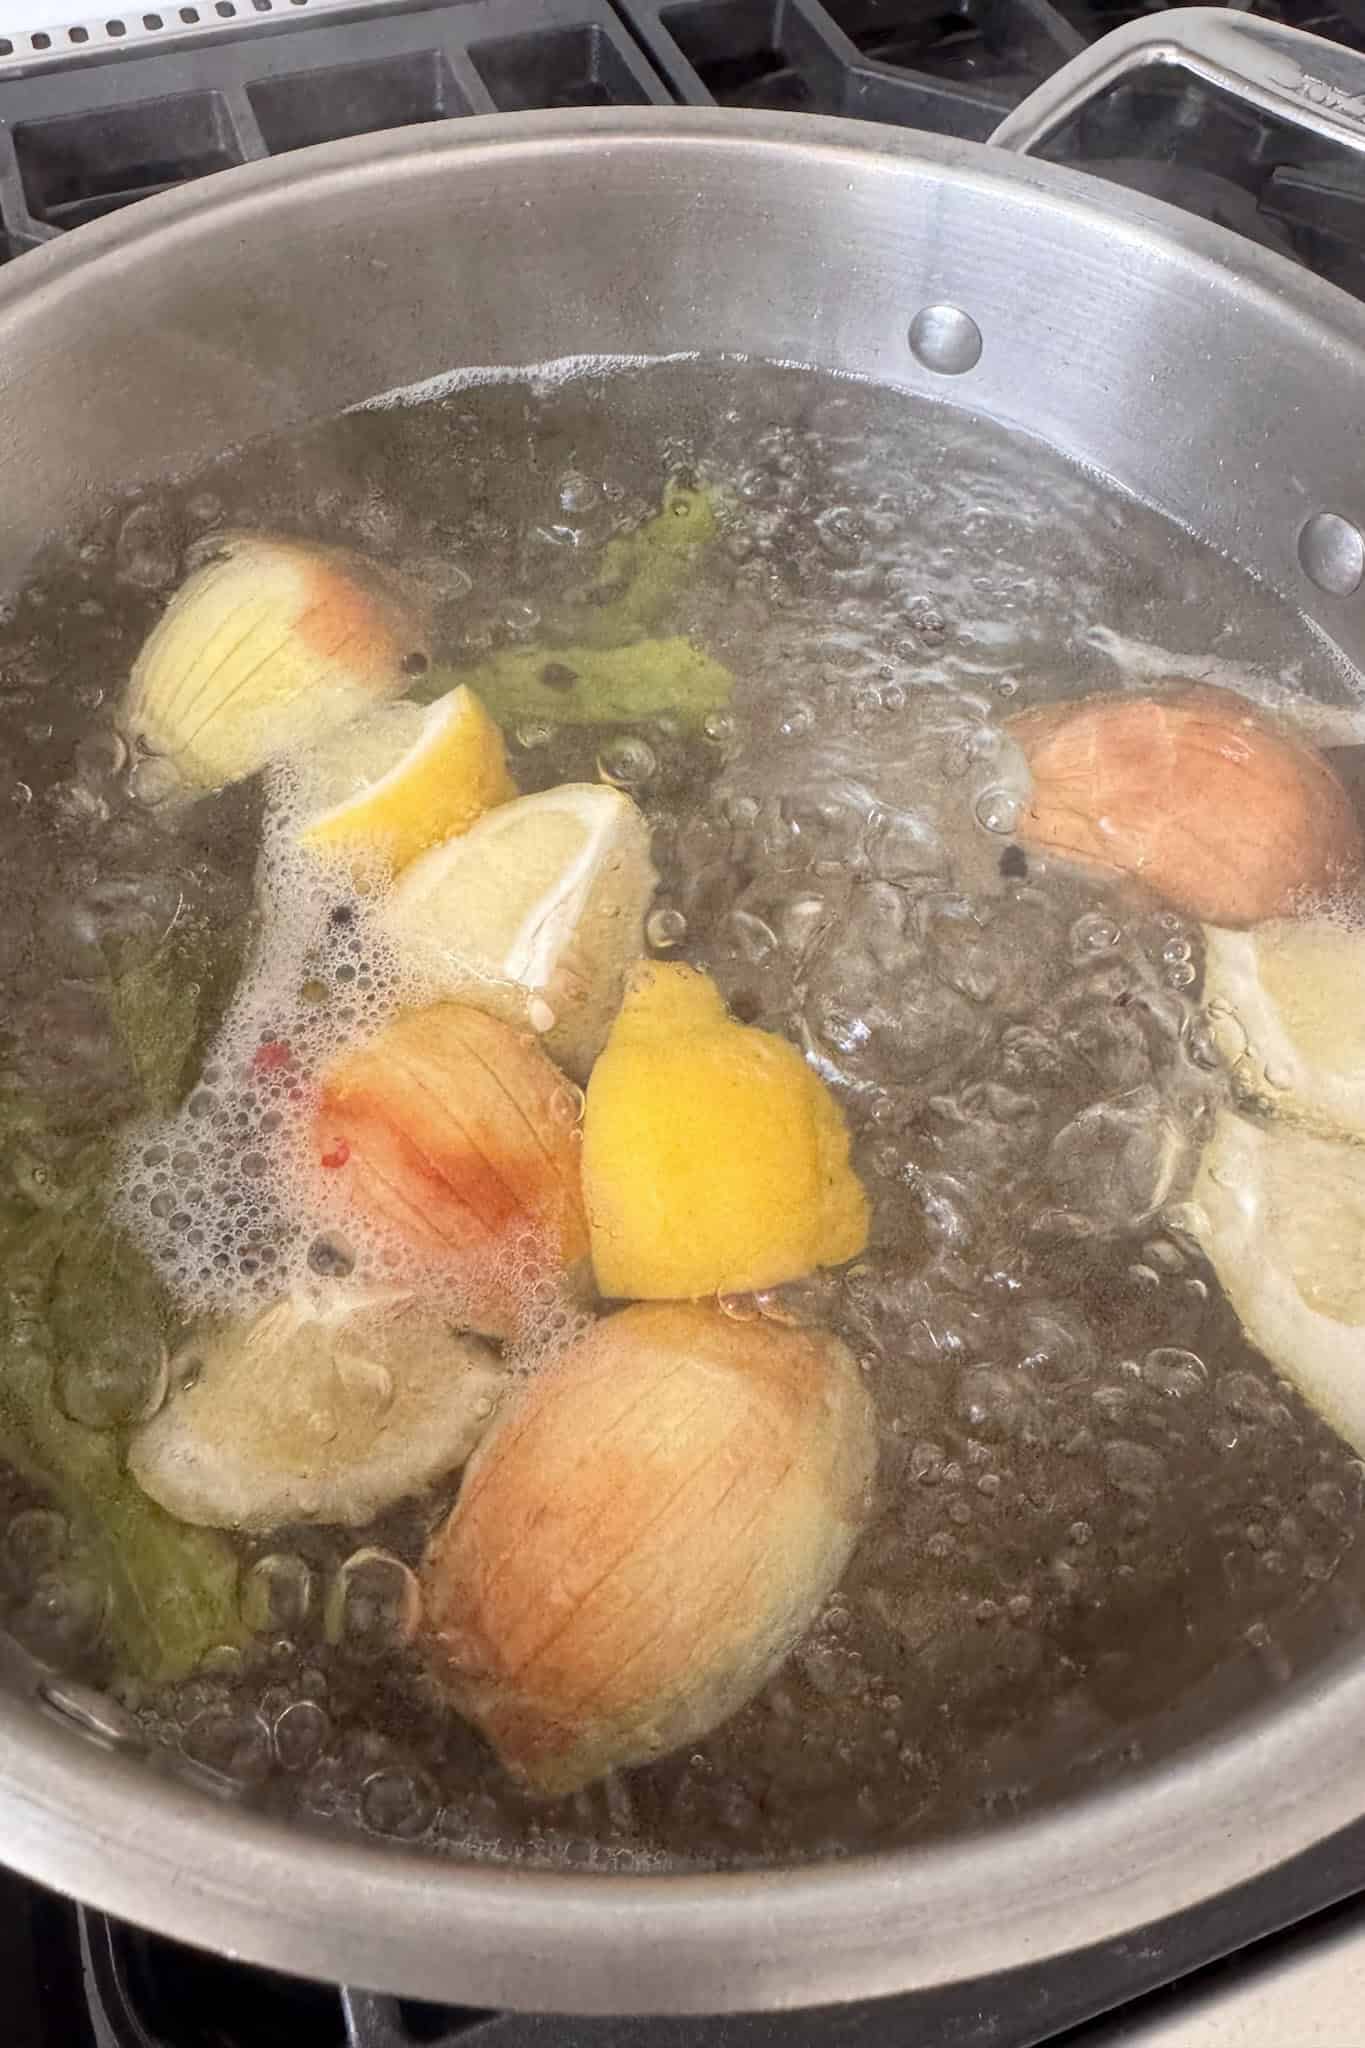 pot of water with boiled water and onions and lemons